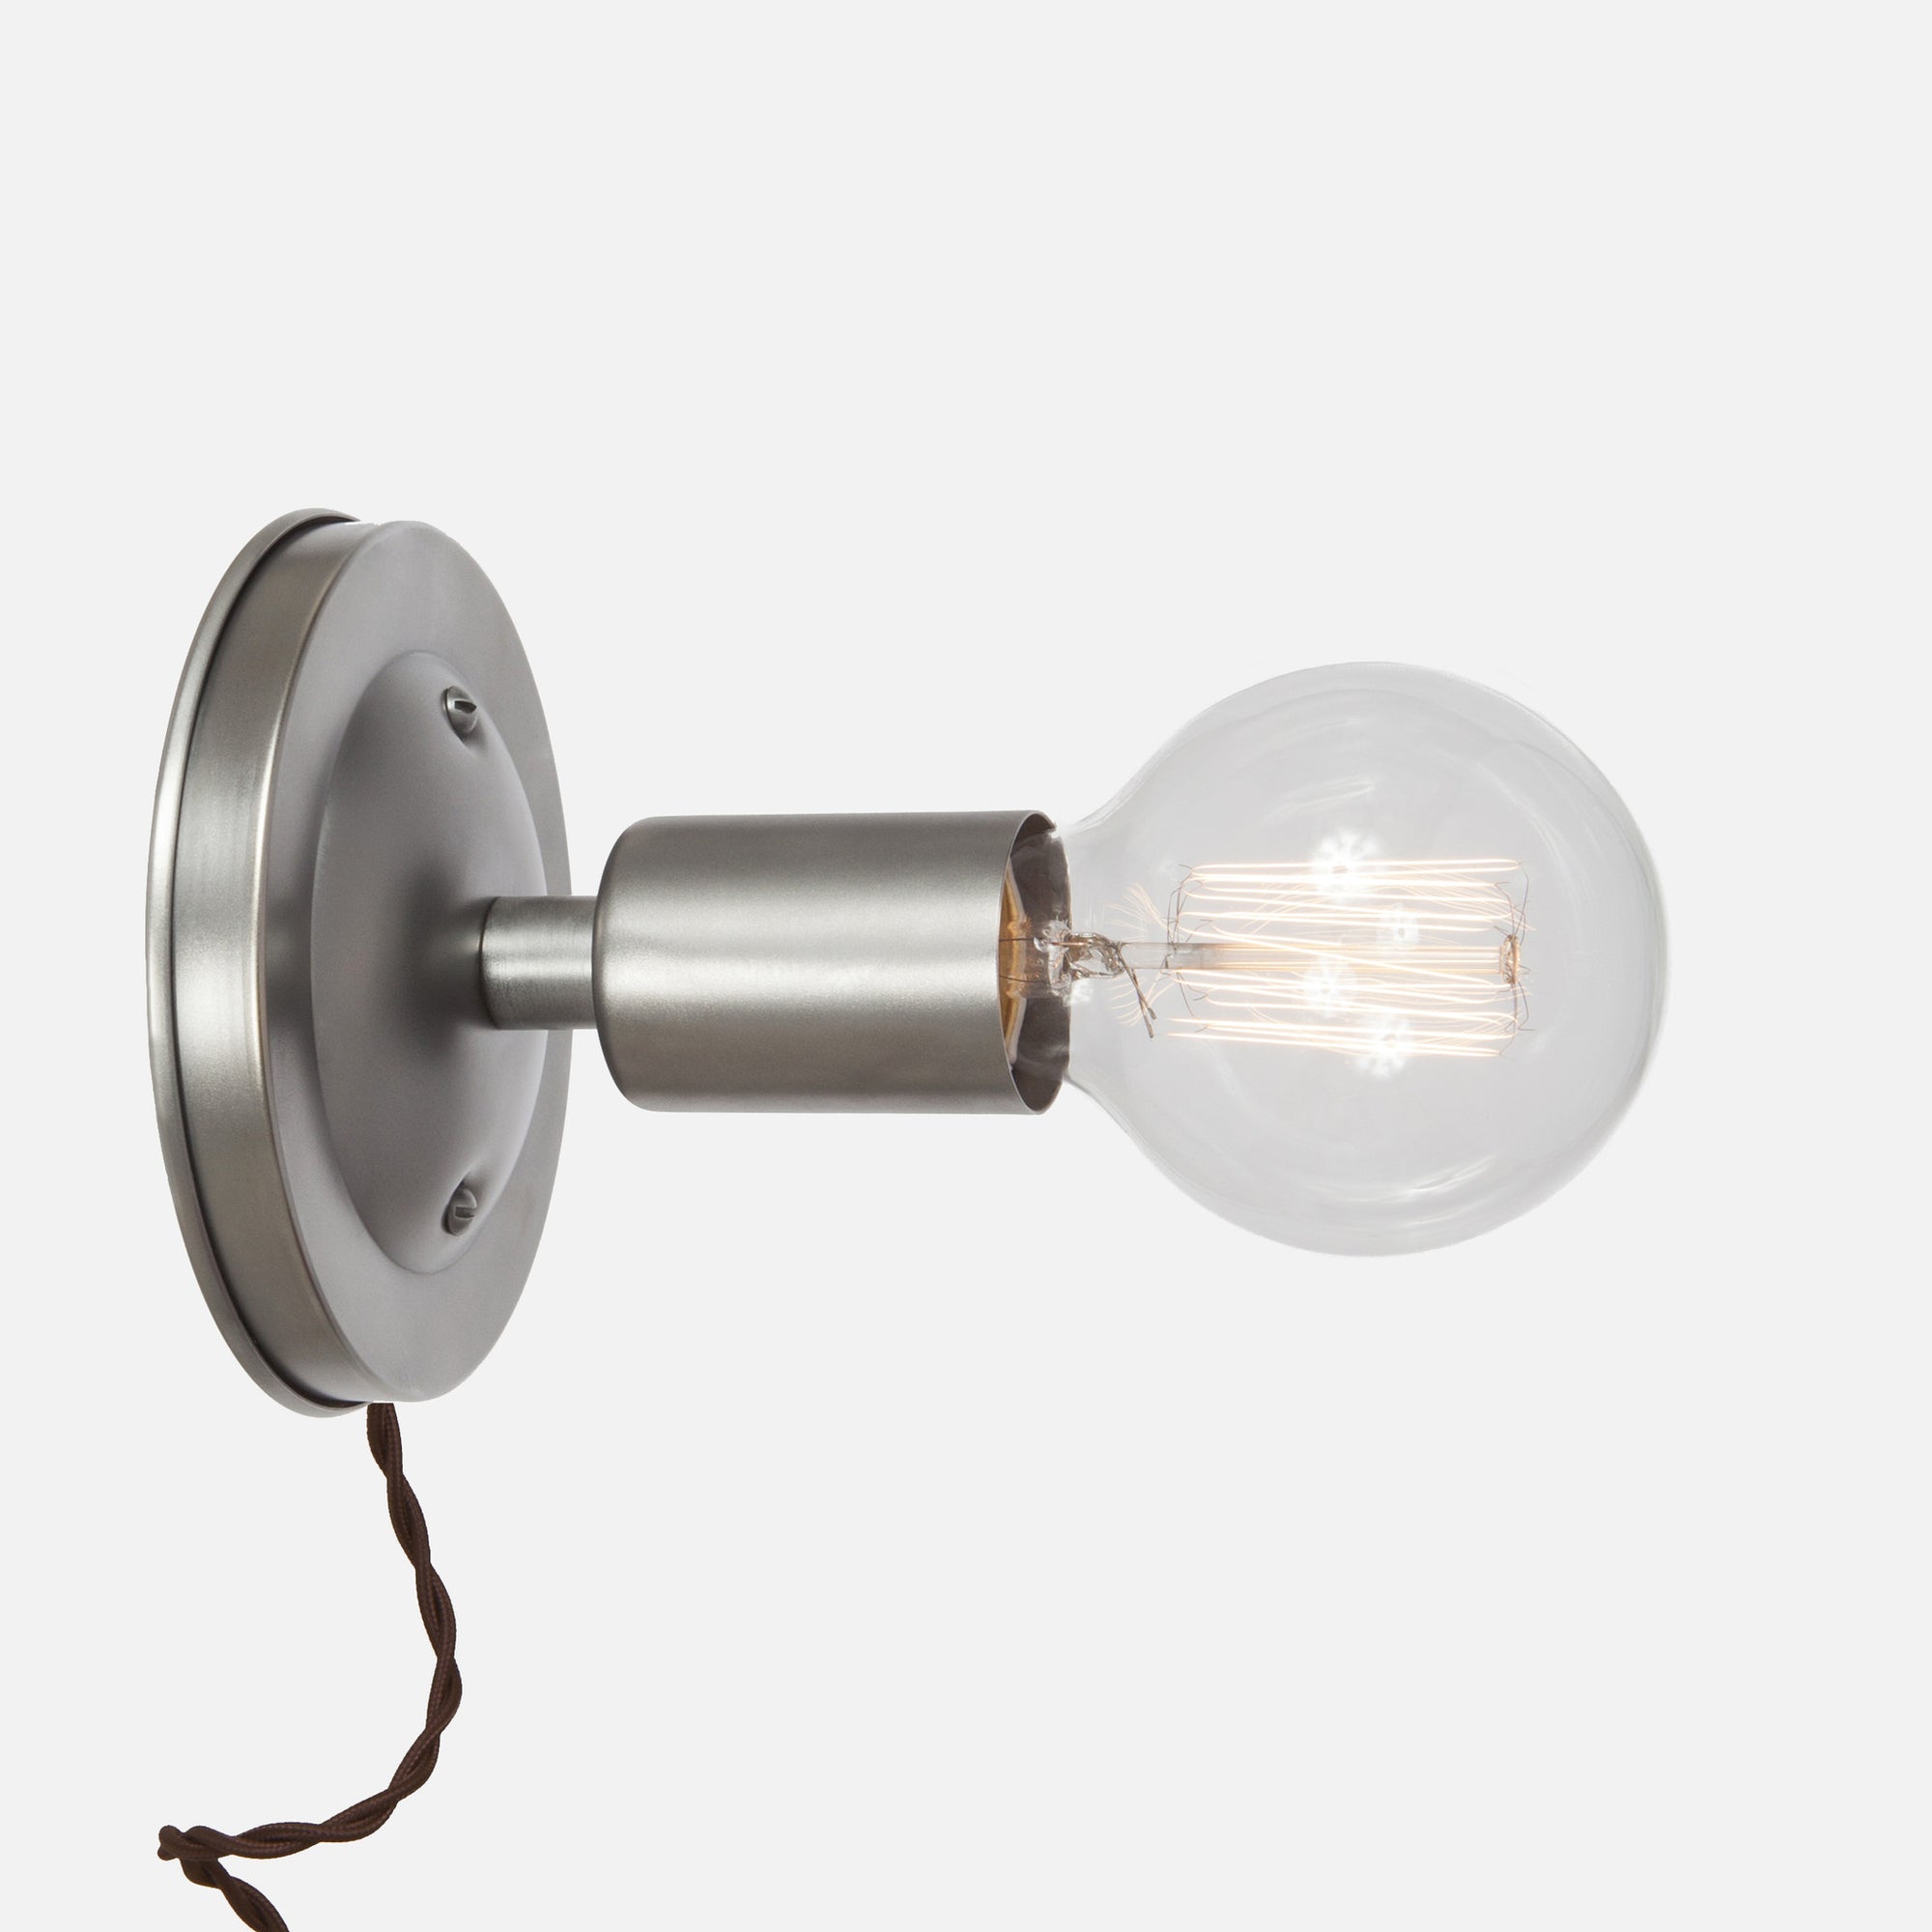 Bare Bulb Wall Sconce - Vintage Silver - Plug-In